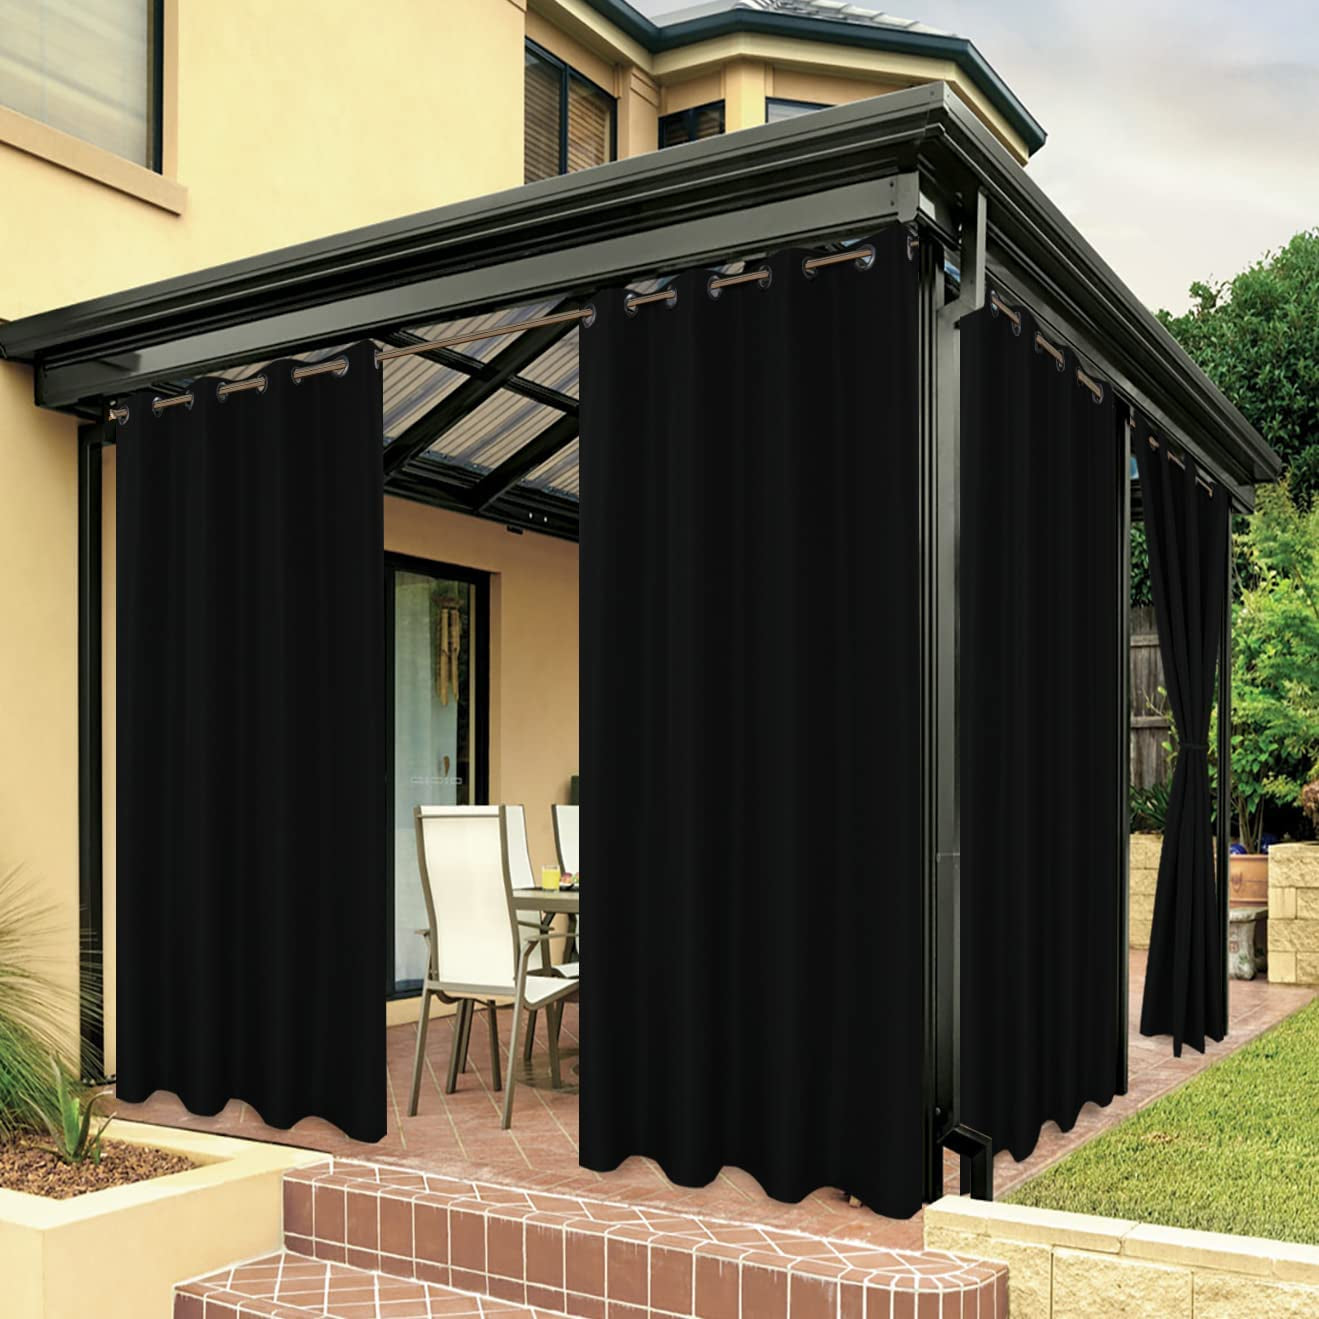 BONZER Outdoor Curtains for Patio Waterproof, Premium Thick Privacy Weatherproof Grommet outside Curtains for Porch, Gazebo, Deck, 1 Panel, 54W X 84L Inch, White  BONZER Black 84W X 84L Inch 